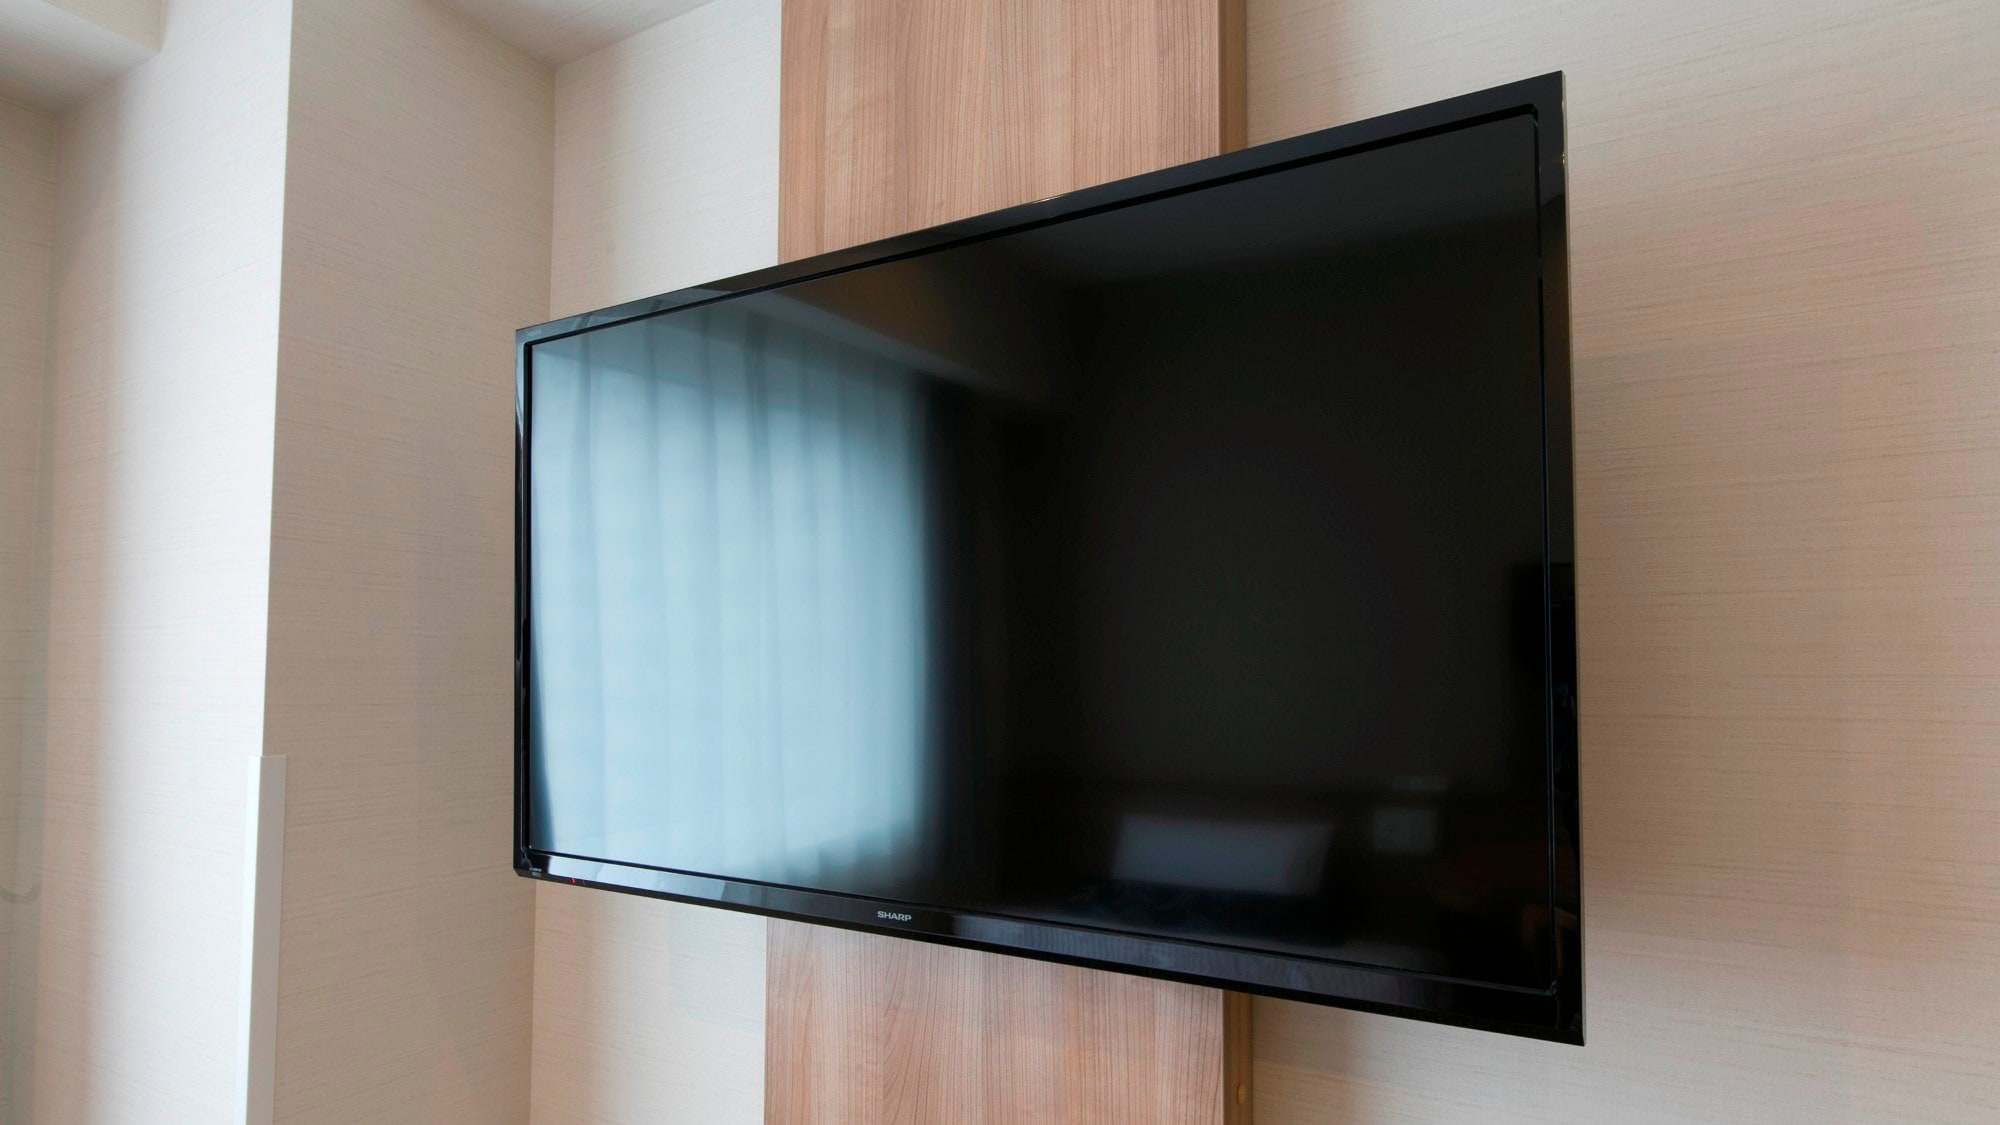 Large screen 40 inch wall-mounted TV introduced in all rooms